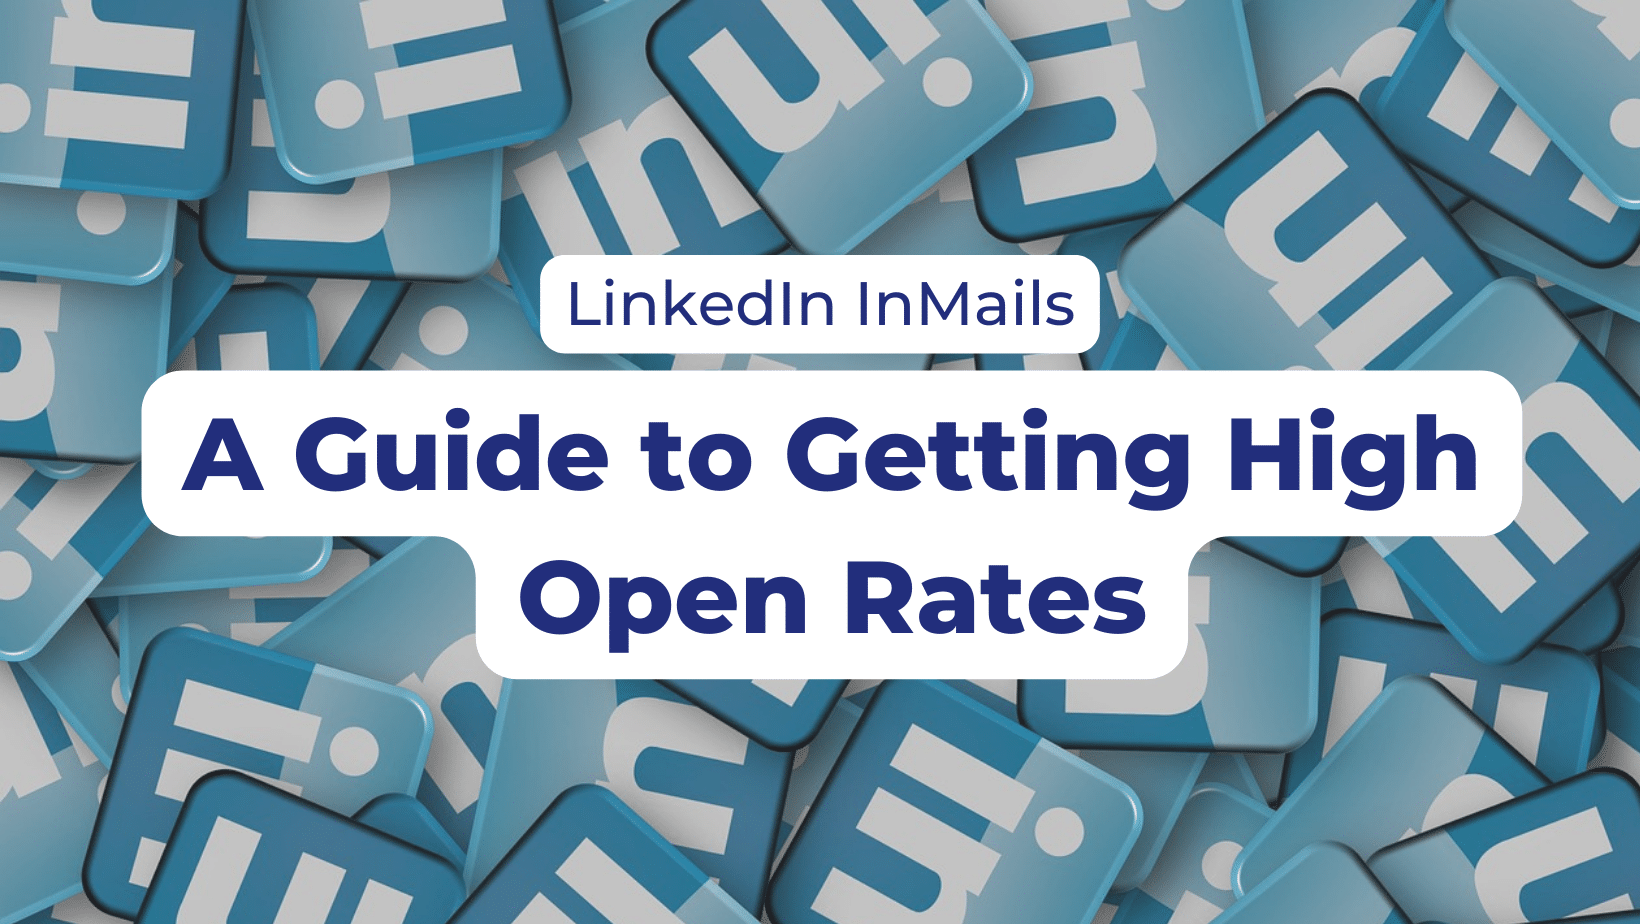 LinkedIn InMails: A Guide to Getting High Open Rates